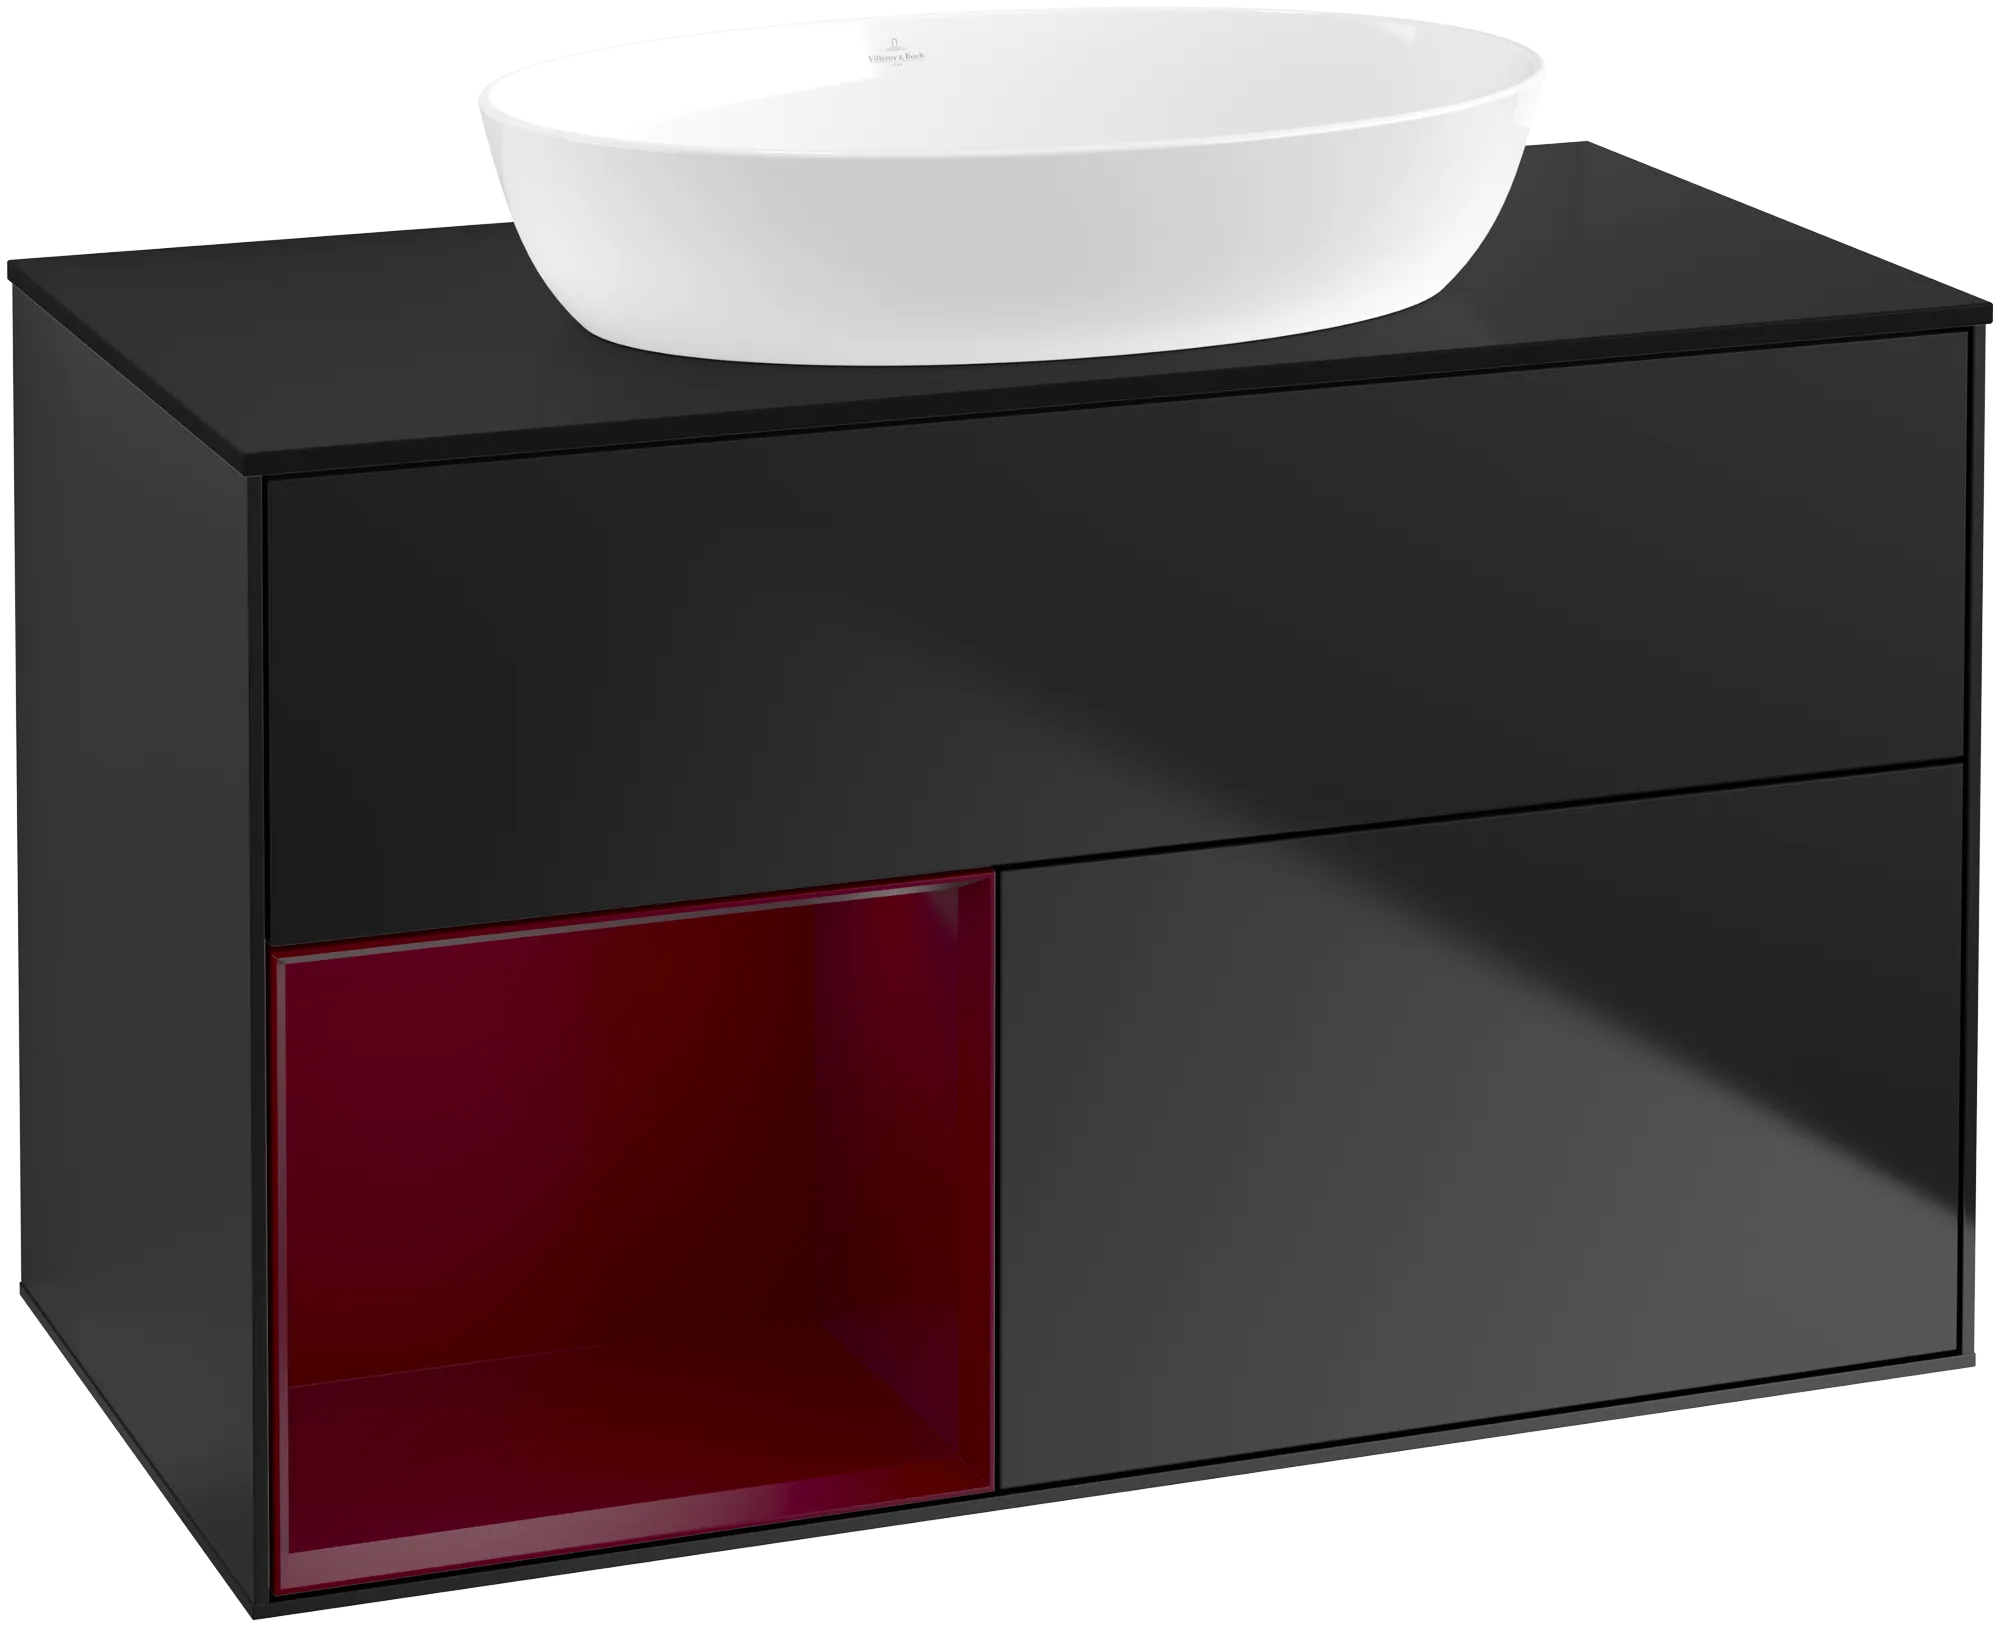 Obrázek VILLEROY BOCH Finion Vanity unit, with lighting, 2 pull-out compartments, 1000 x 603 x 501 mm, Black Matt Lacquer / Peony Matt Lacquer / Glass Black Matt #GA12HBPD